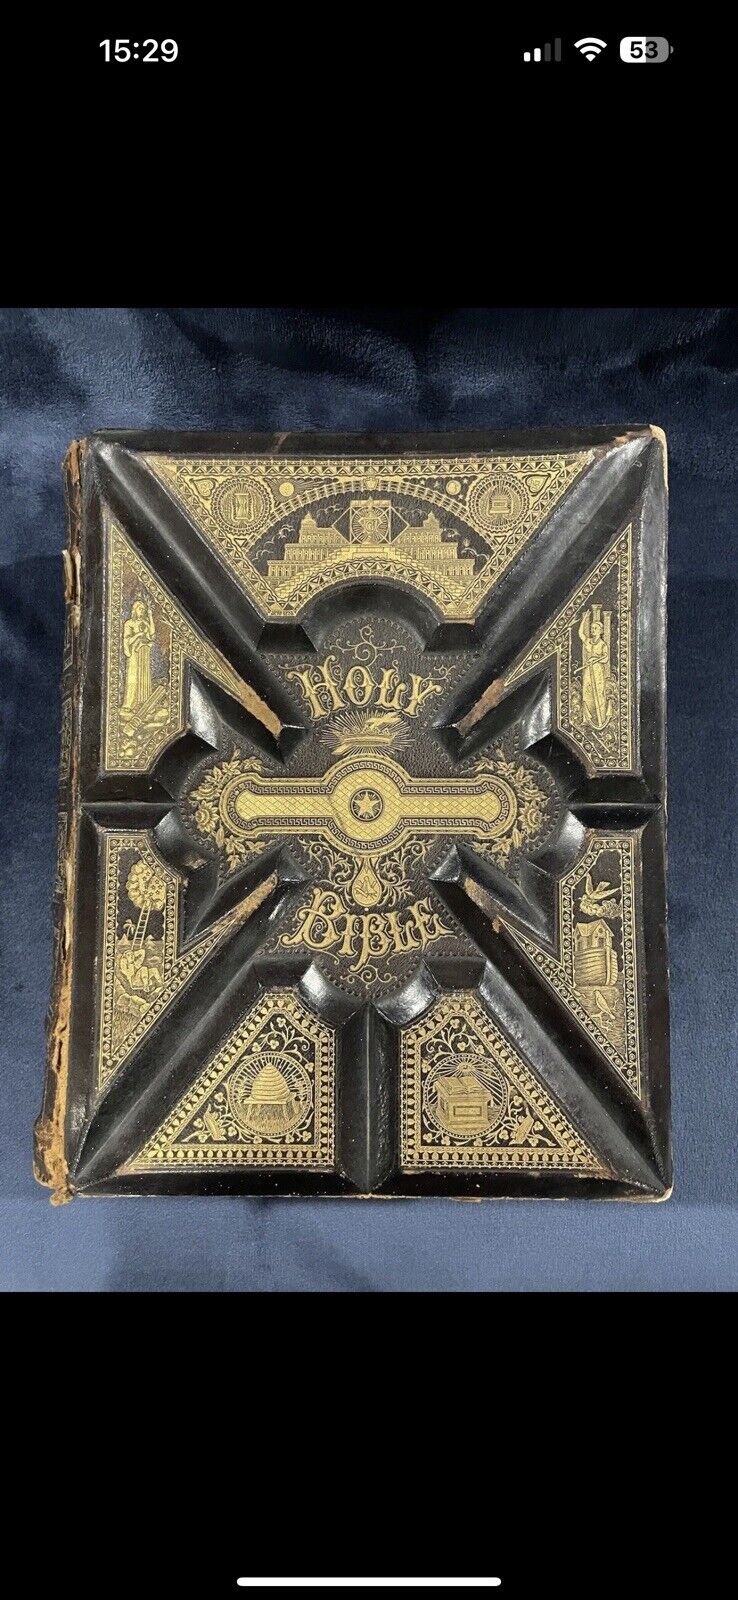 1886, THE HOLY BIBLE, PARALLEL COLUMN EDITION, LARGE BEAUTIFUL LEATHER BINDING